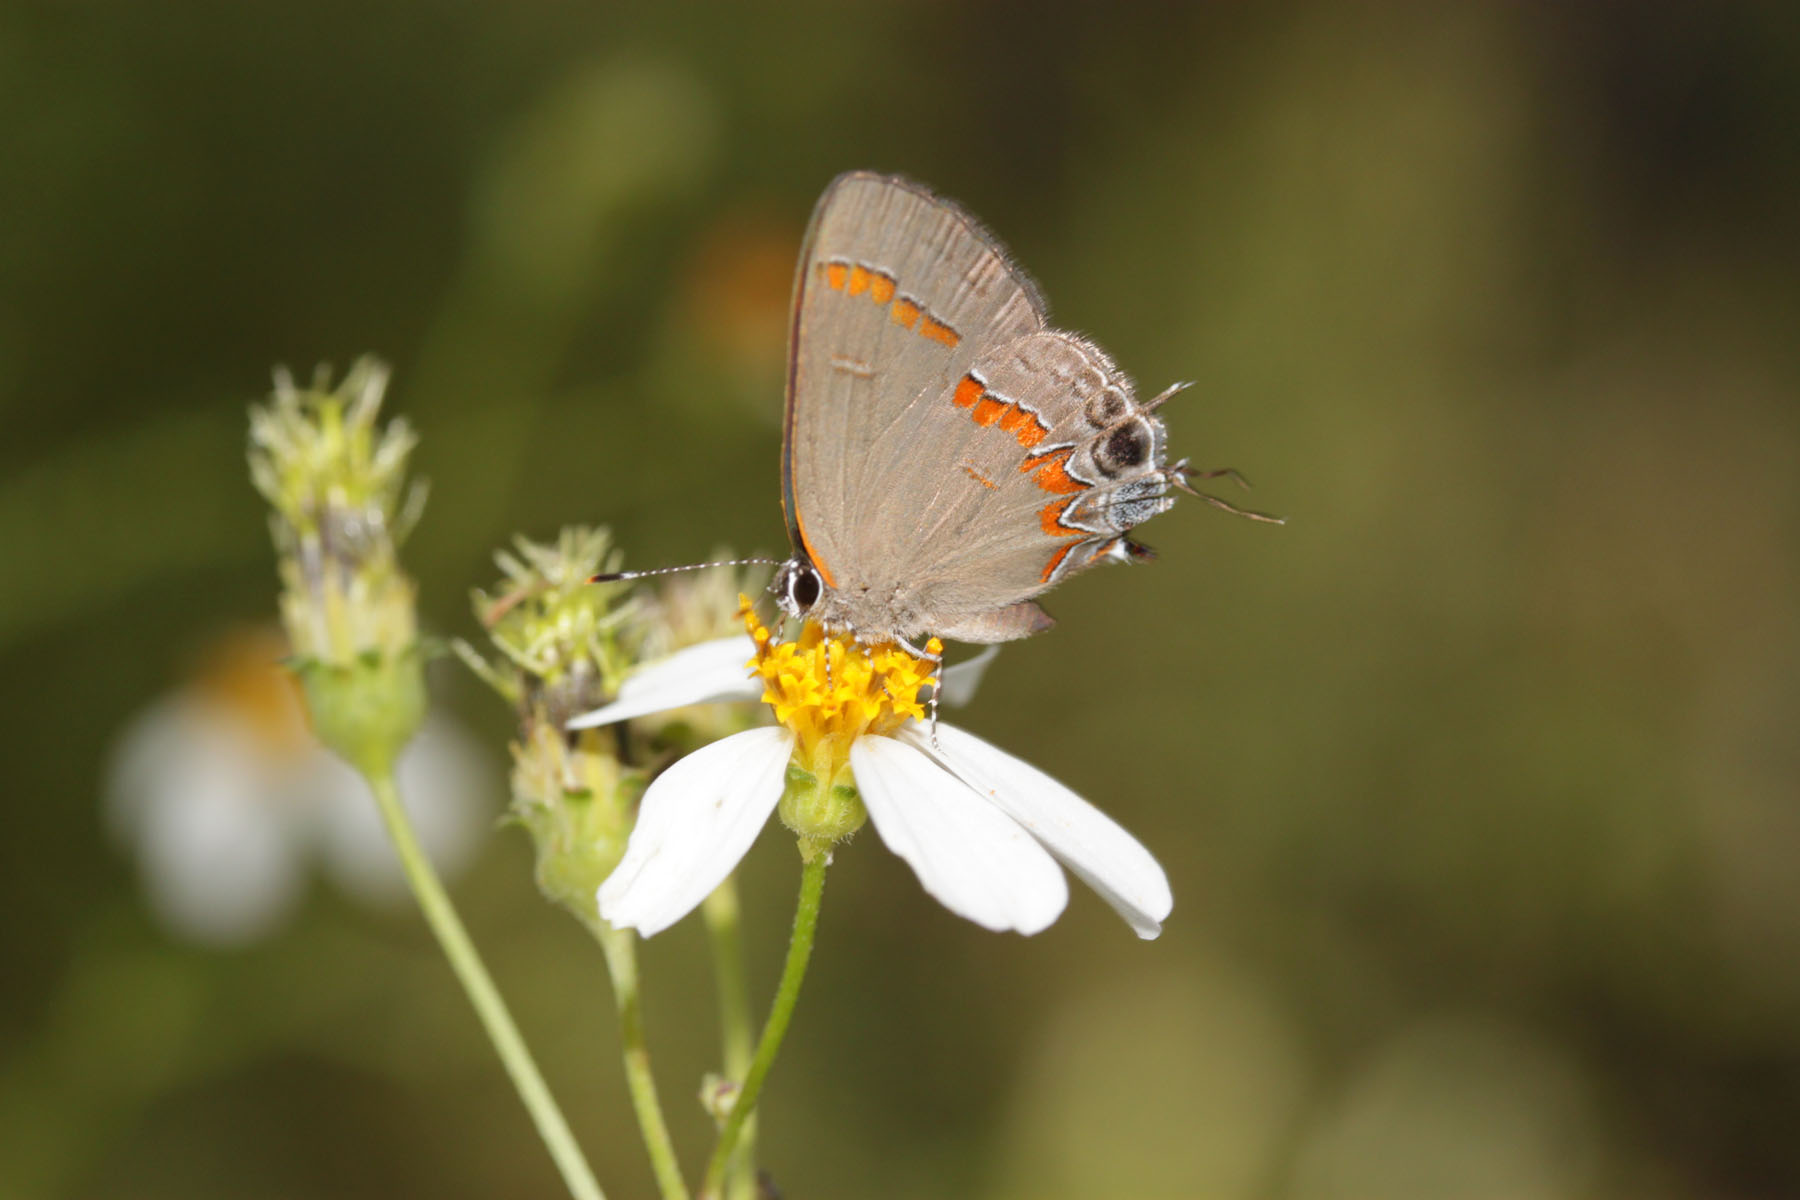 Jumping spider vs. hairstreak butterfly – Research News